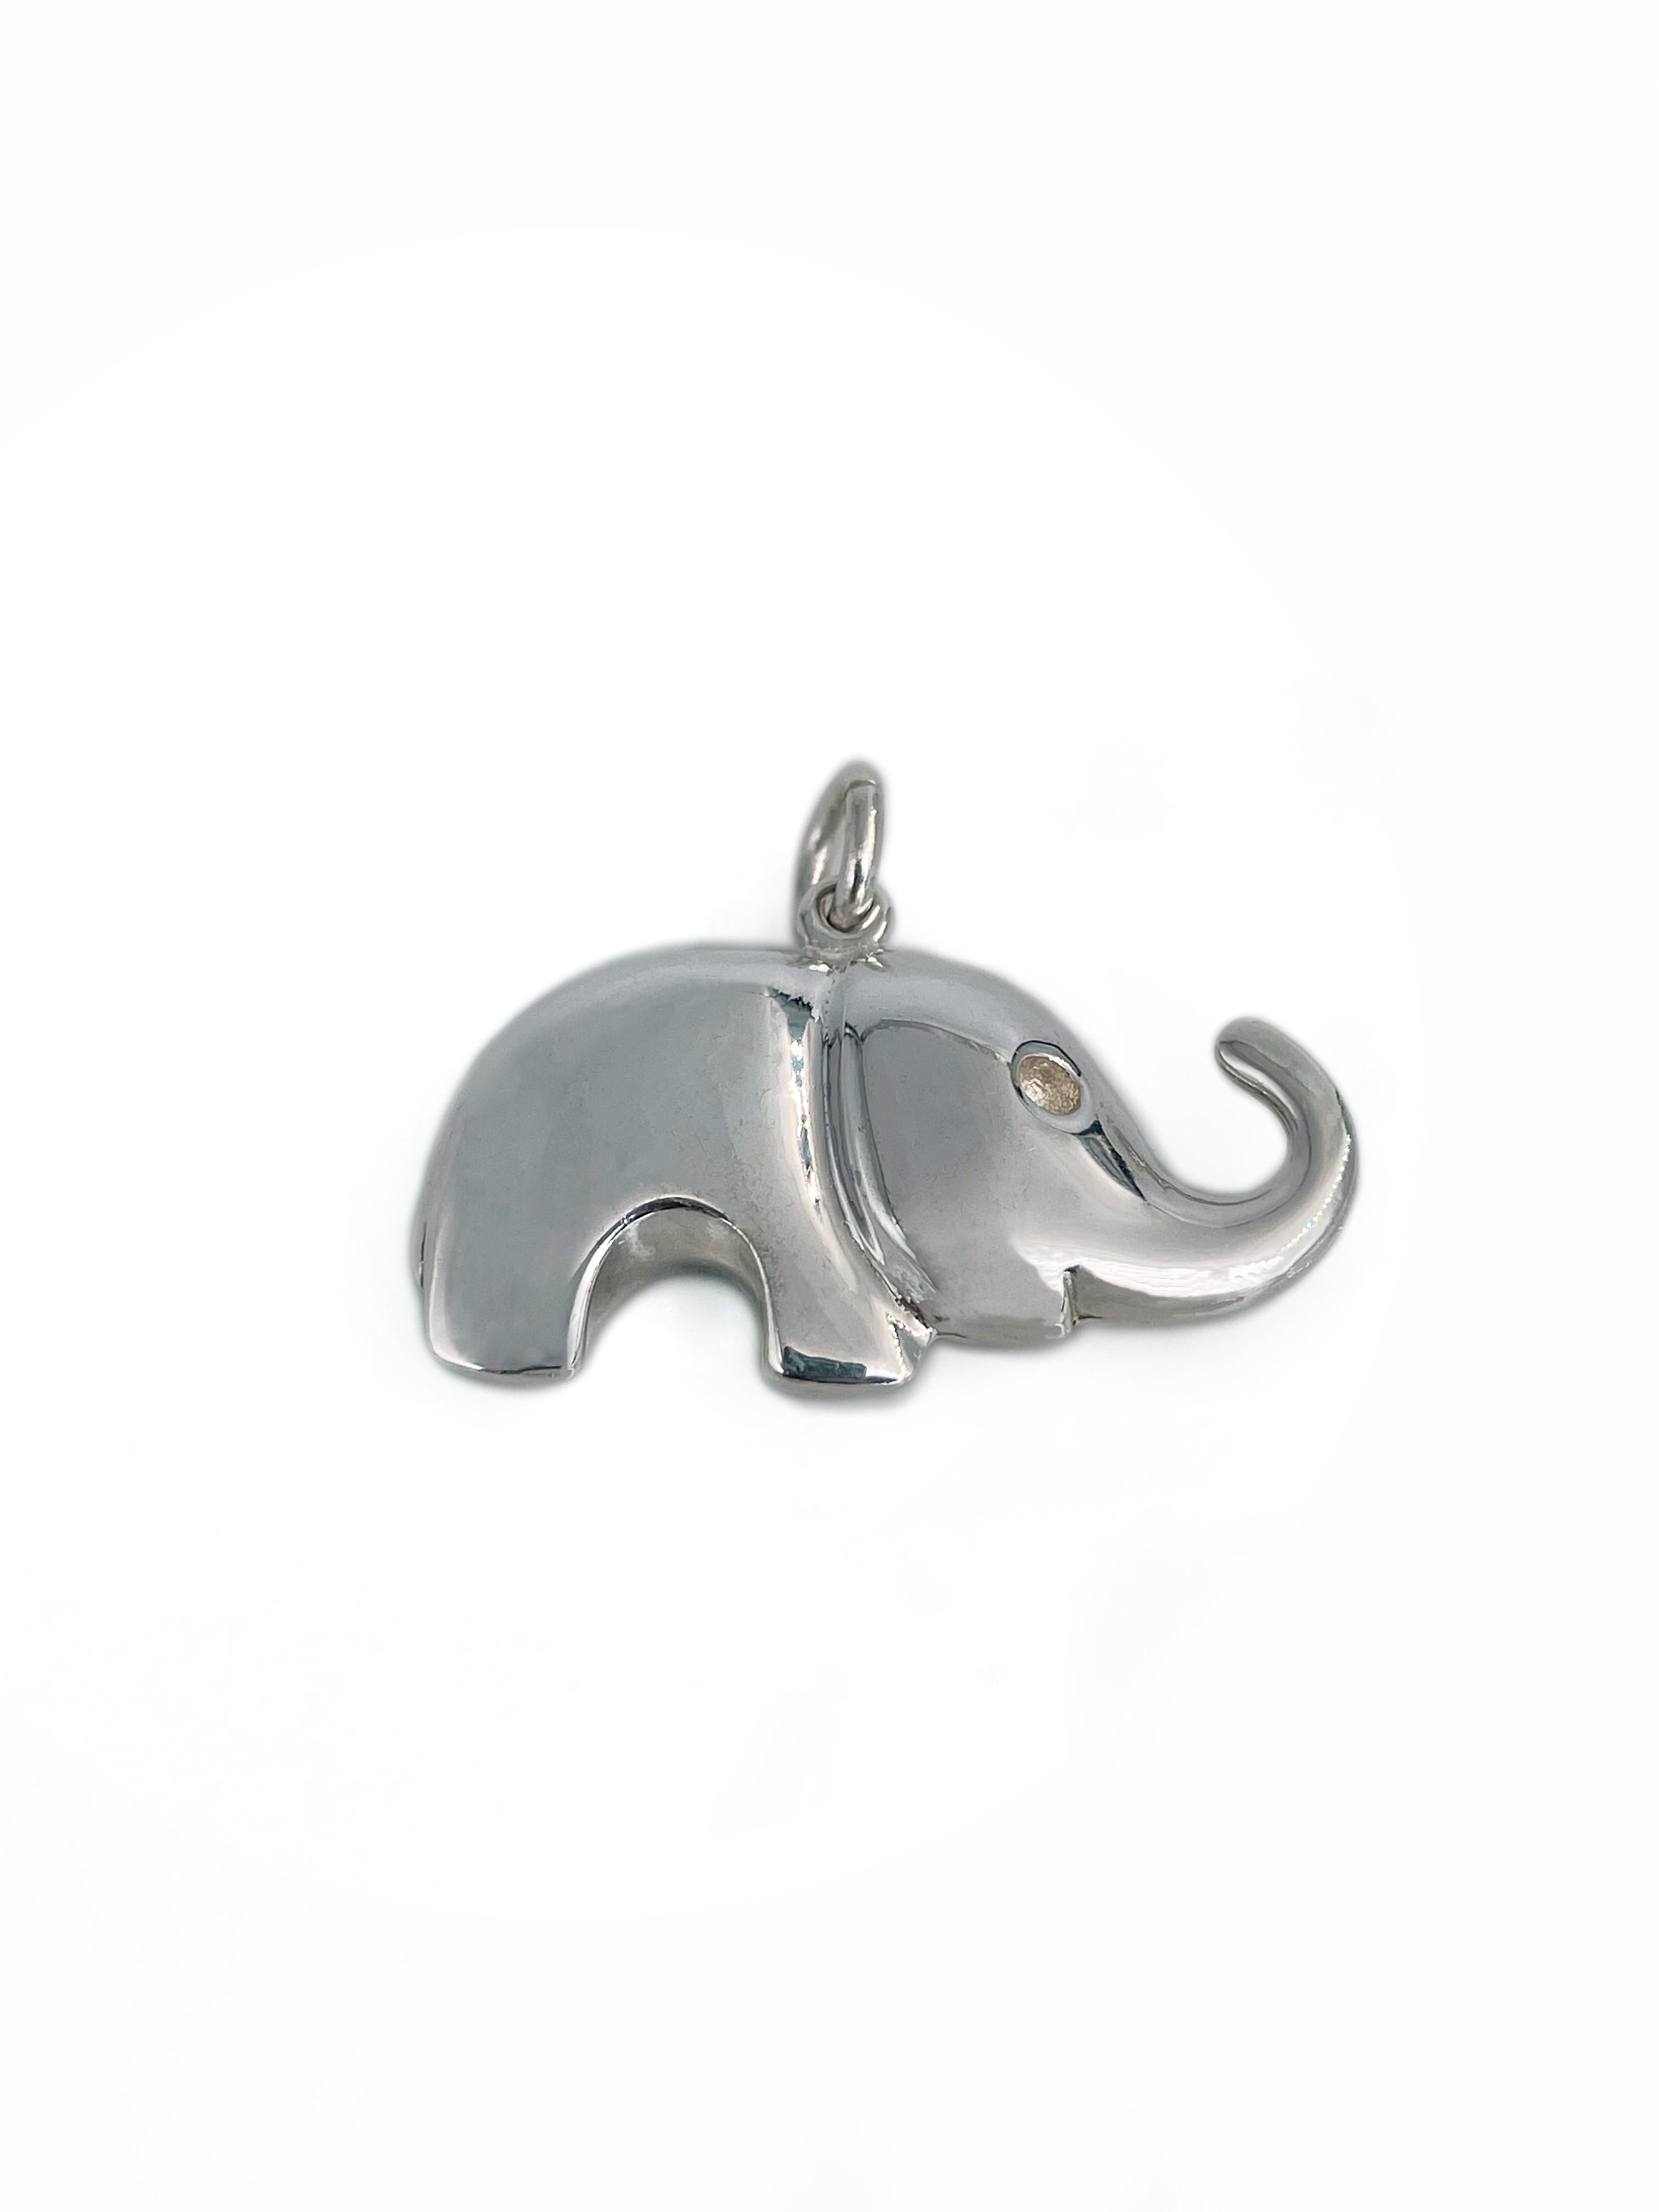 This is a lovely elephant shape charm pendant designed by Tiffany & Co. in 1990s. It is crafted in 925  hallmark silver. 

Signed: Tiffany & Co. 925

Weight: 16.81g 
Size: 2.8x3.5cm

———

If you have any questions, please feel free to ask. We